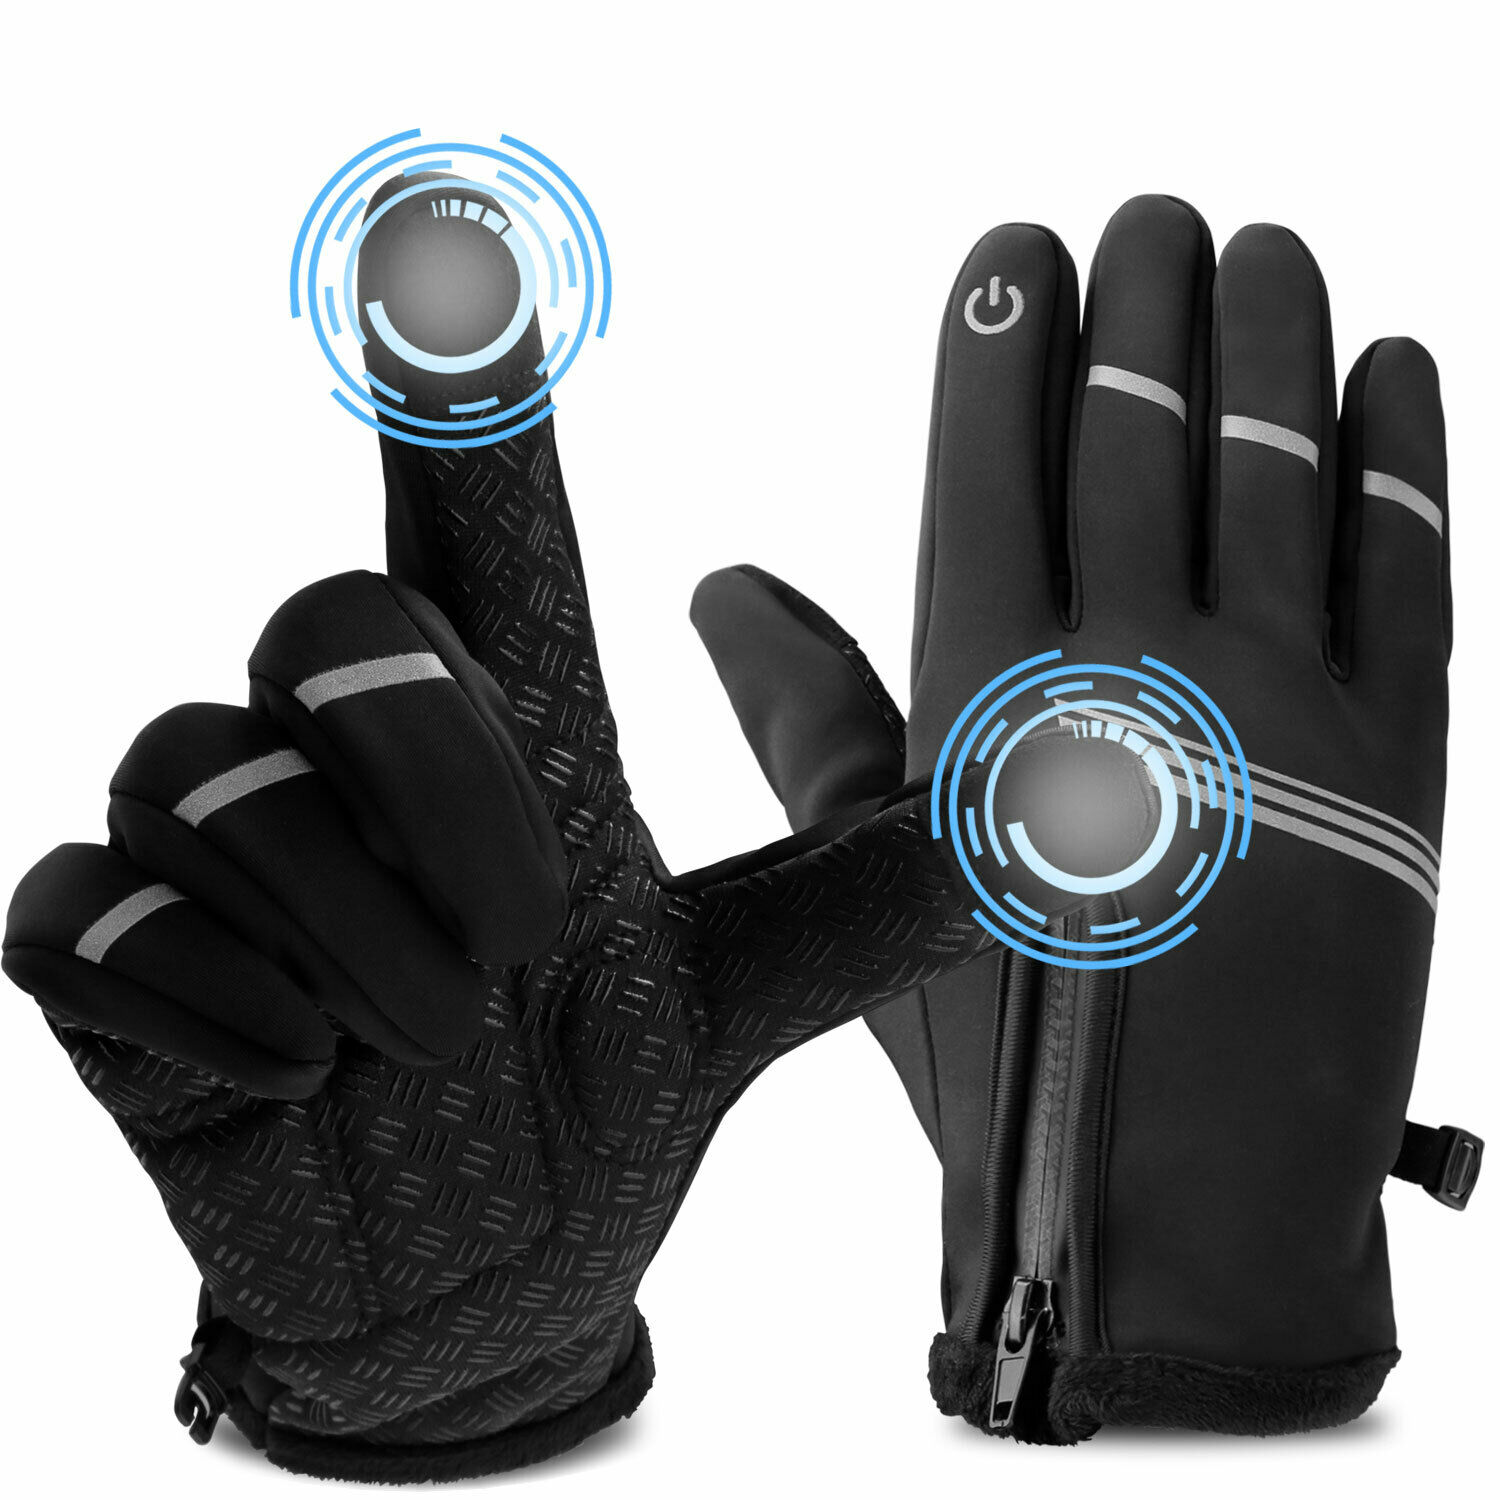 Suede riding gloves mens autumn and winter outdoor windproof plus velvet warmth long lock temperature wrist night reflection